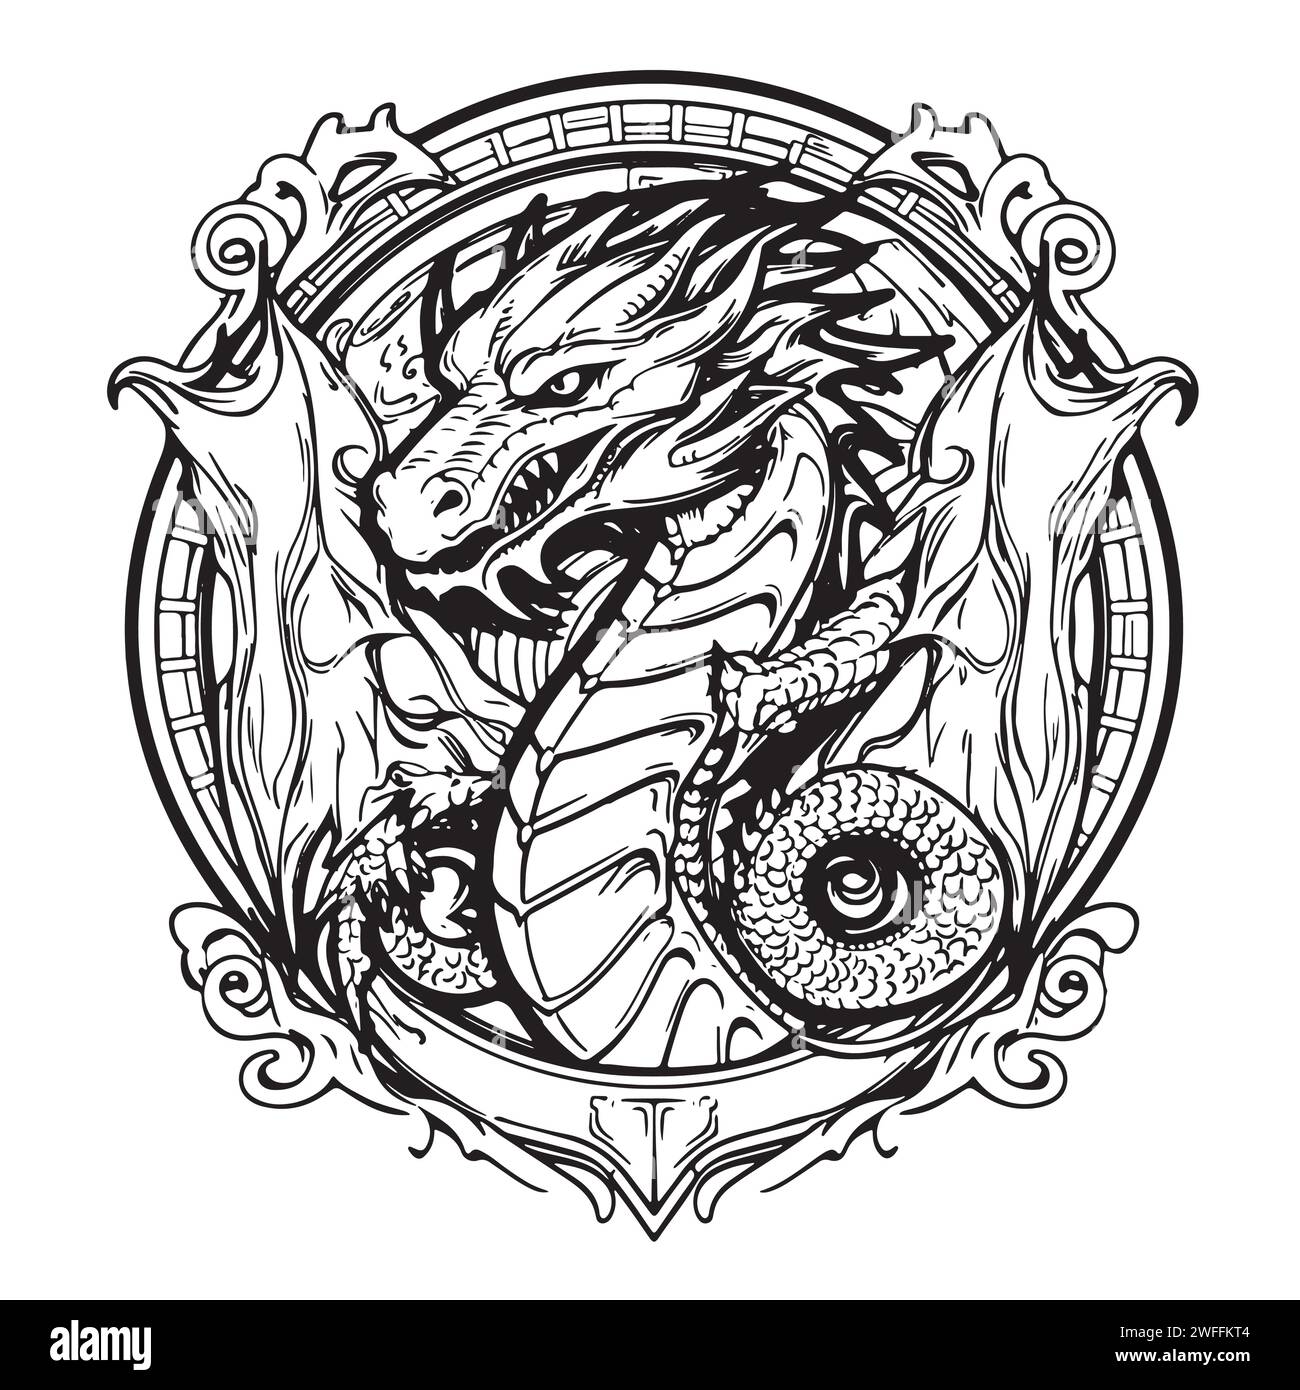 Vector image of a heraldic shield with a dragon, heraldic dragon with ...